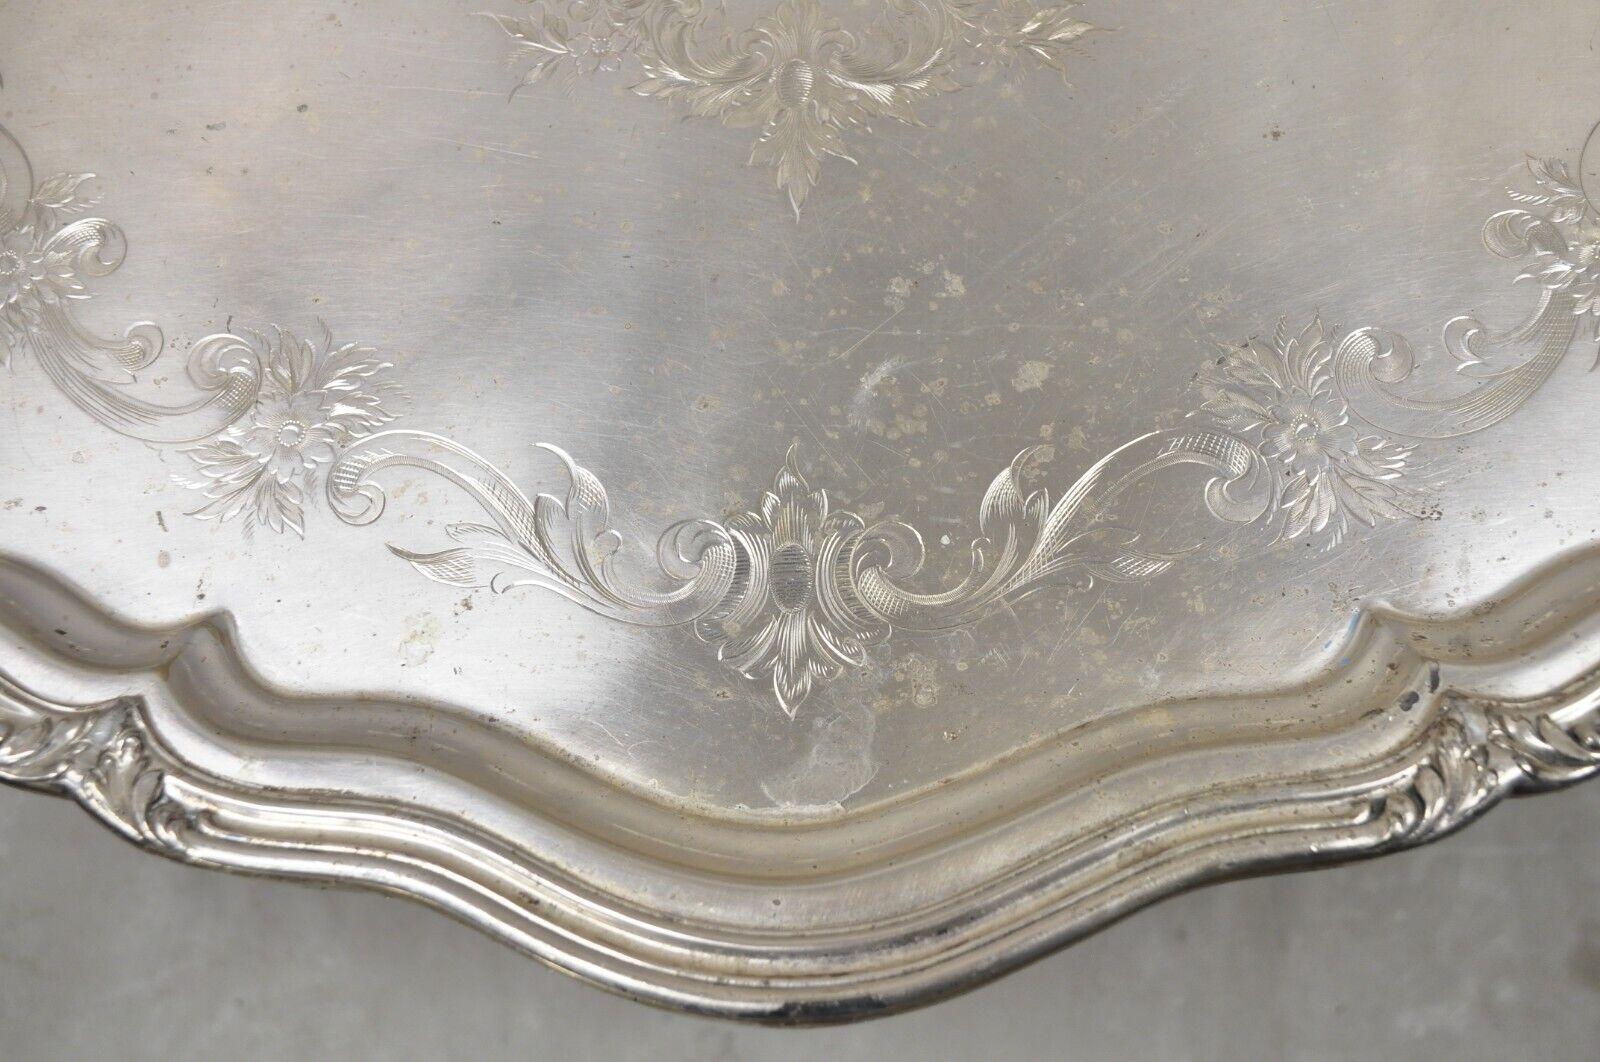 Antique Reed & Barton EPNS 06143 Silver Plated Handle Tray Serving Platter 1